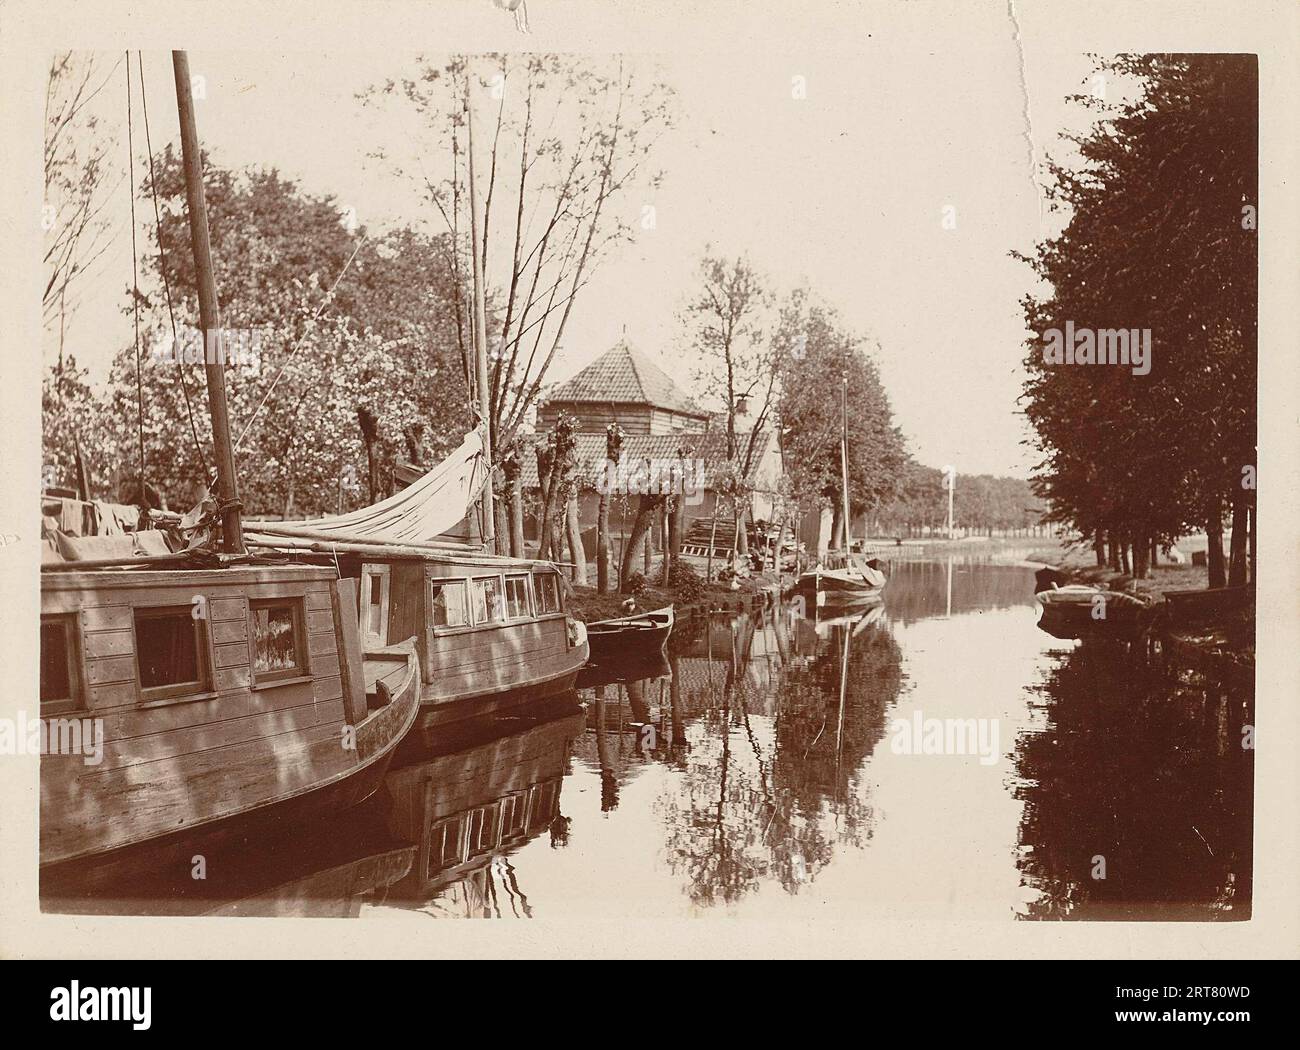 Ships in a ditch, possibly in the area of Broek in Waterland, village in the province of North Holland, Stock Photo